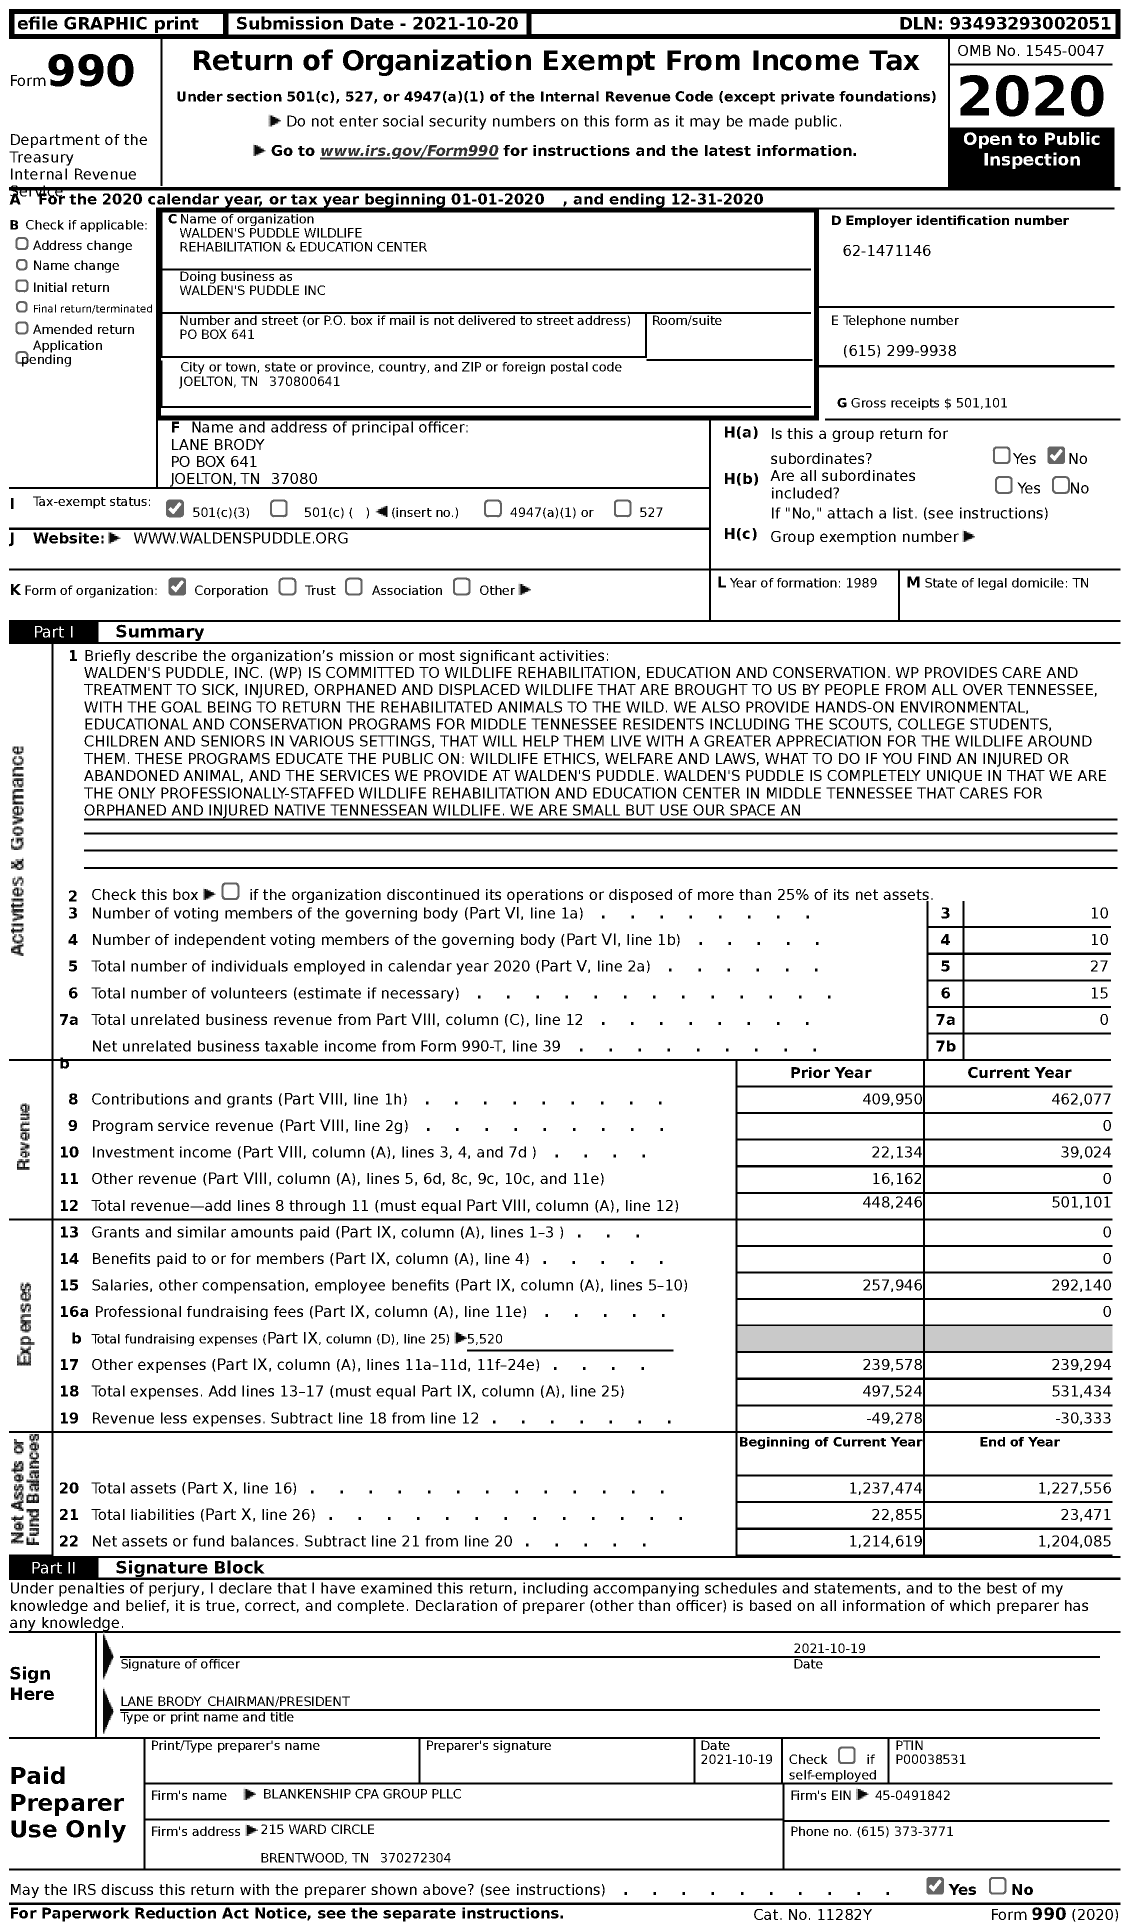 Image of first page of 2020 Form 990 for Walden's Puddle